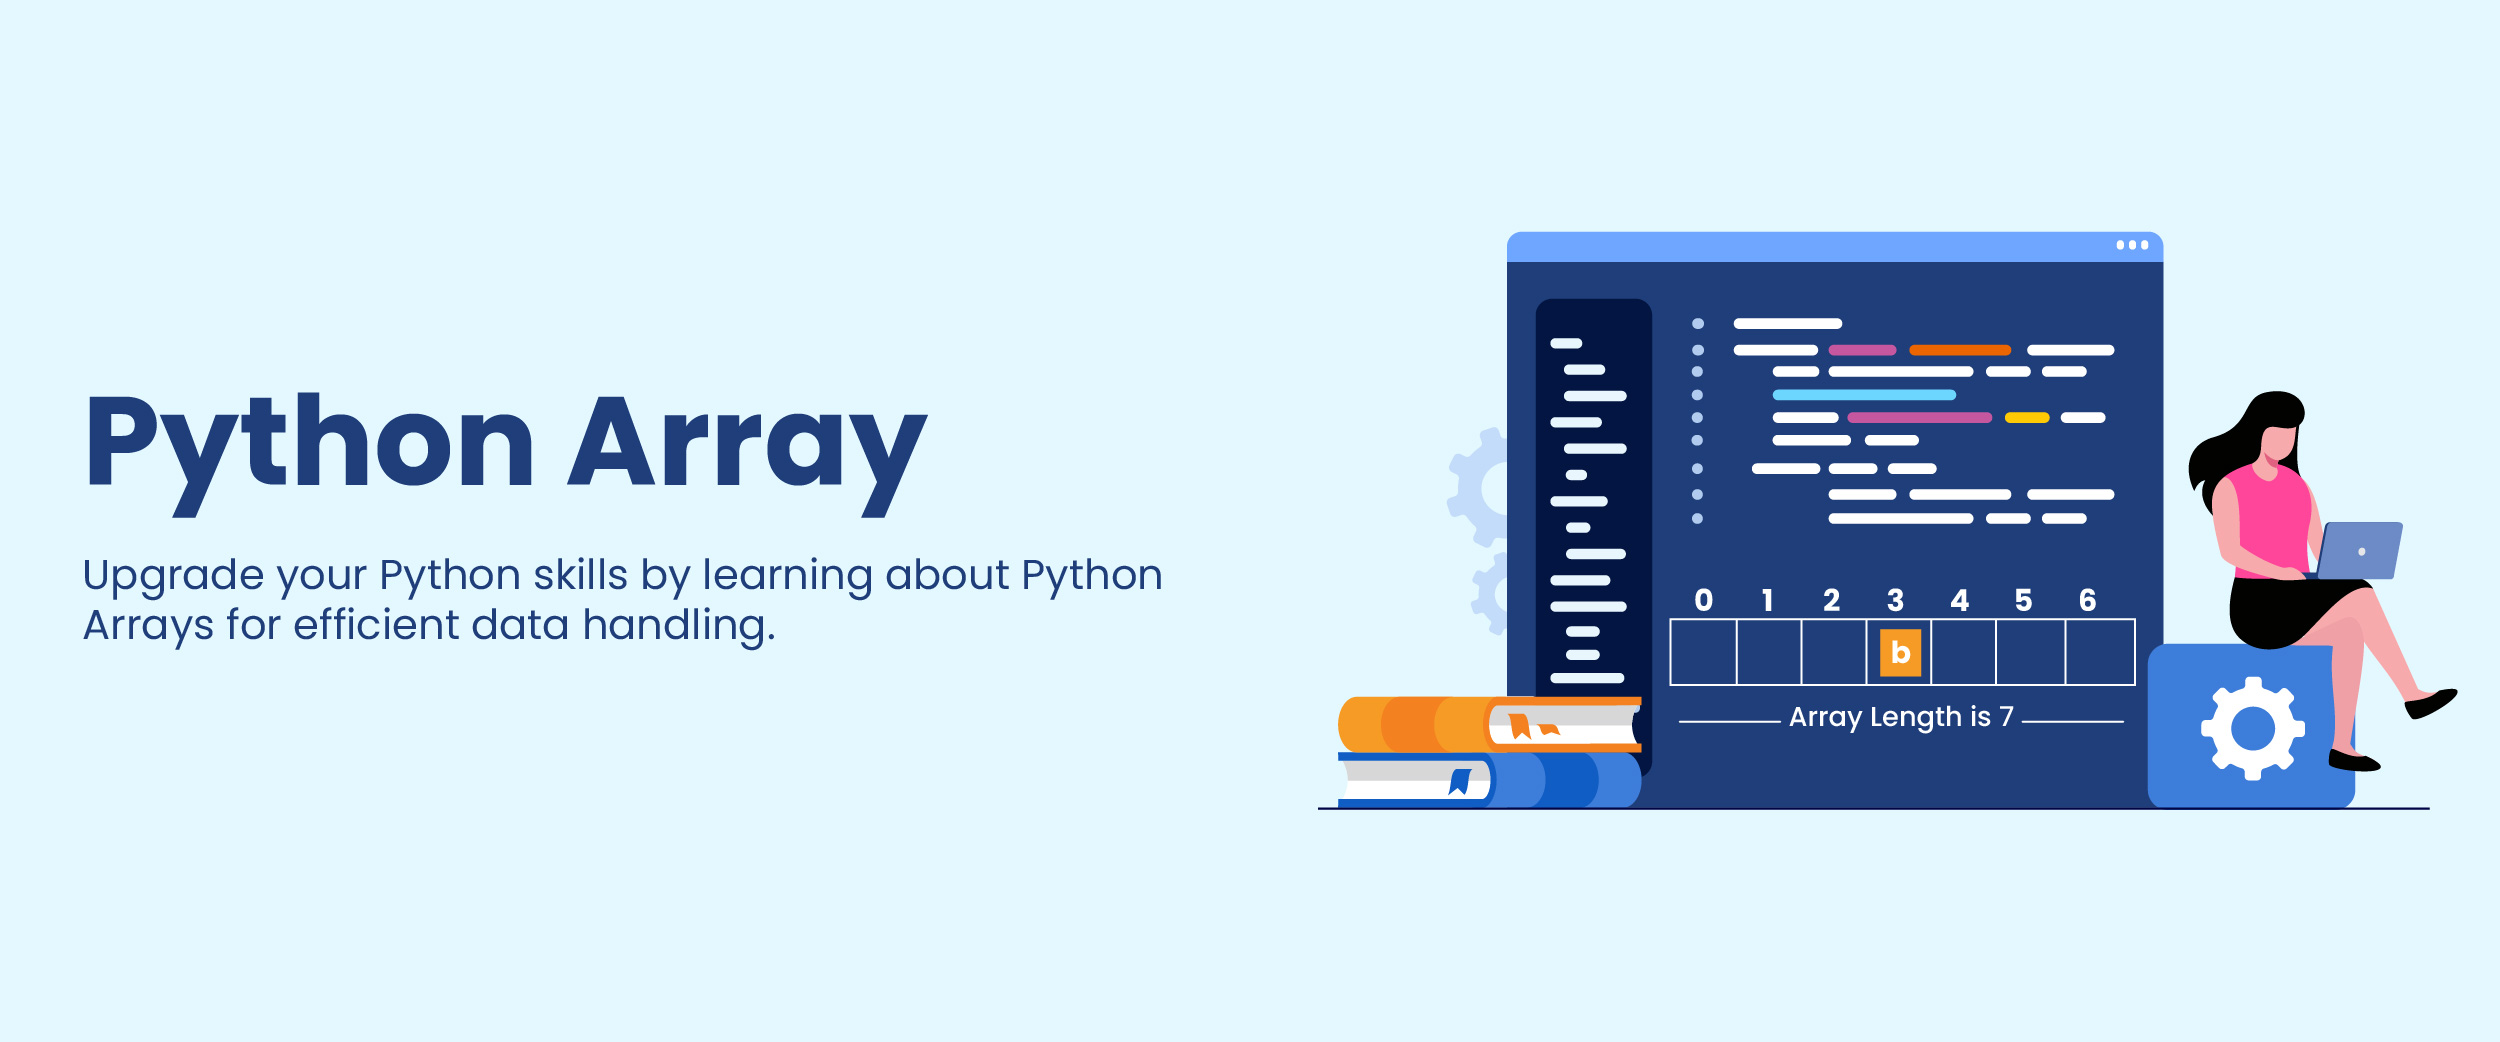 What is Python Array